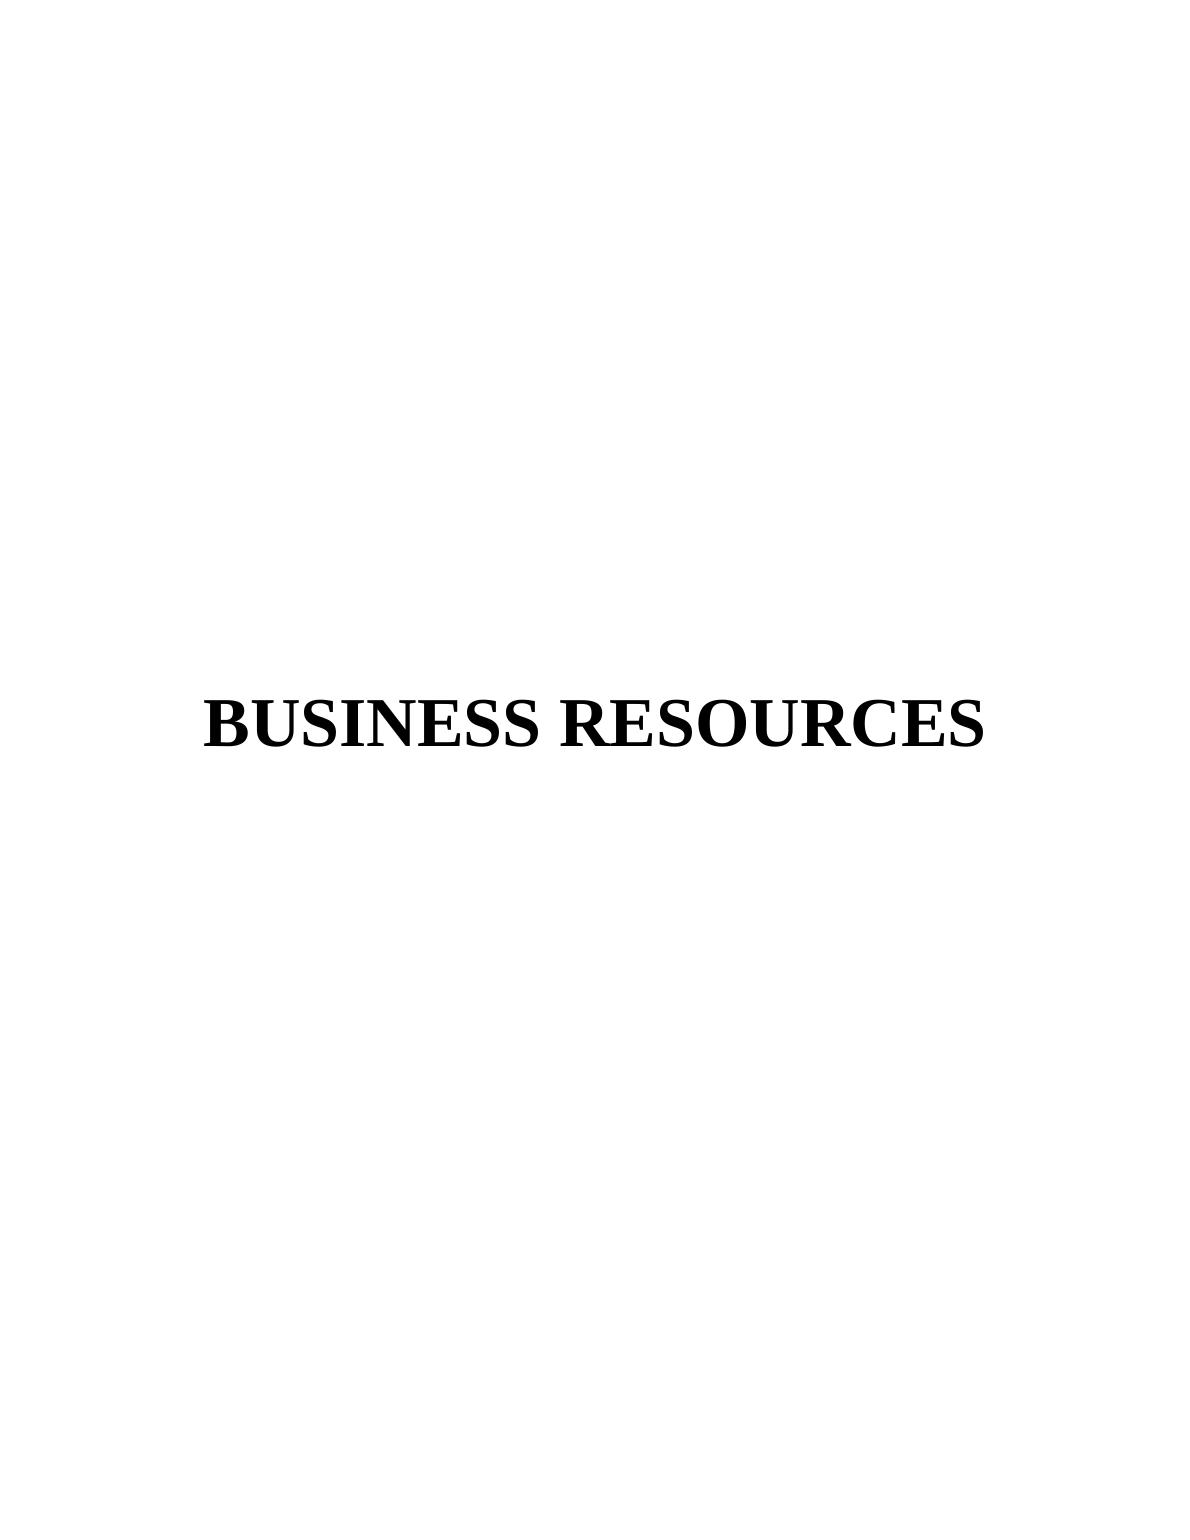 Business Resources of Asda : Assignment_1